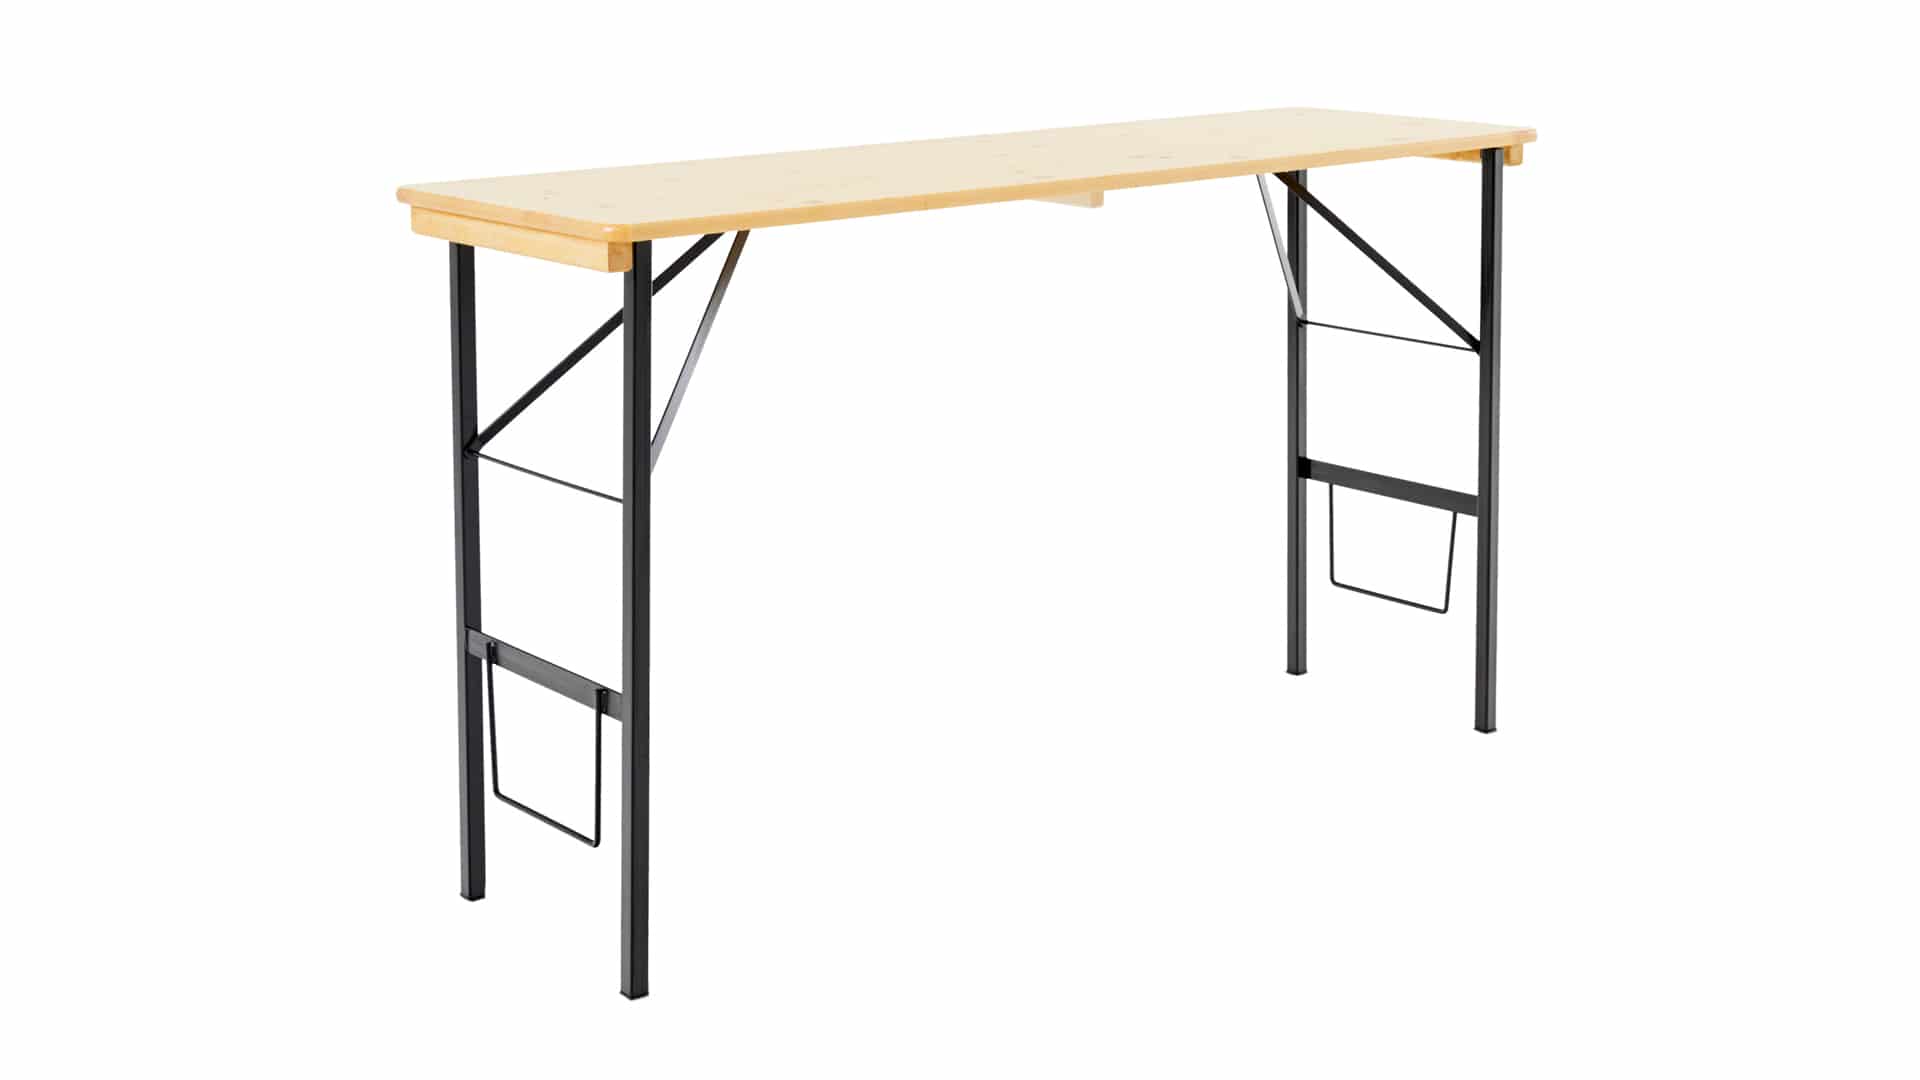 The poseur table "200x60